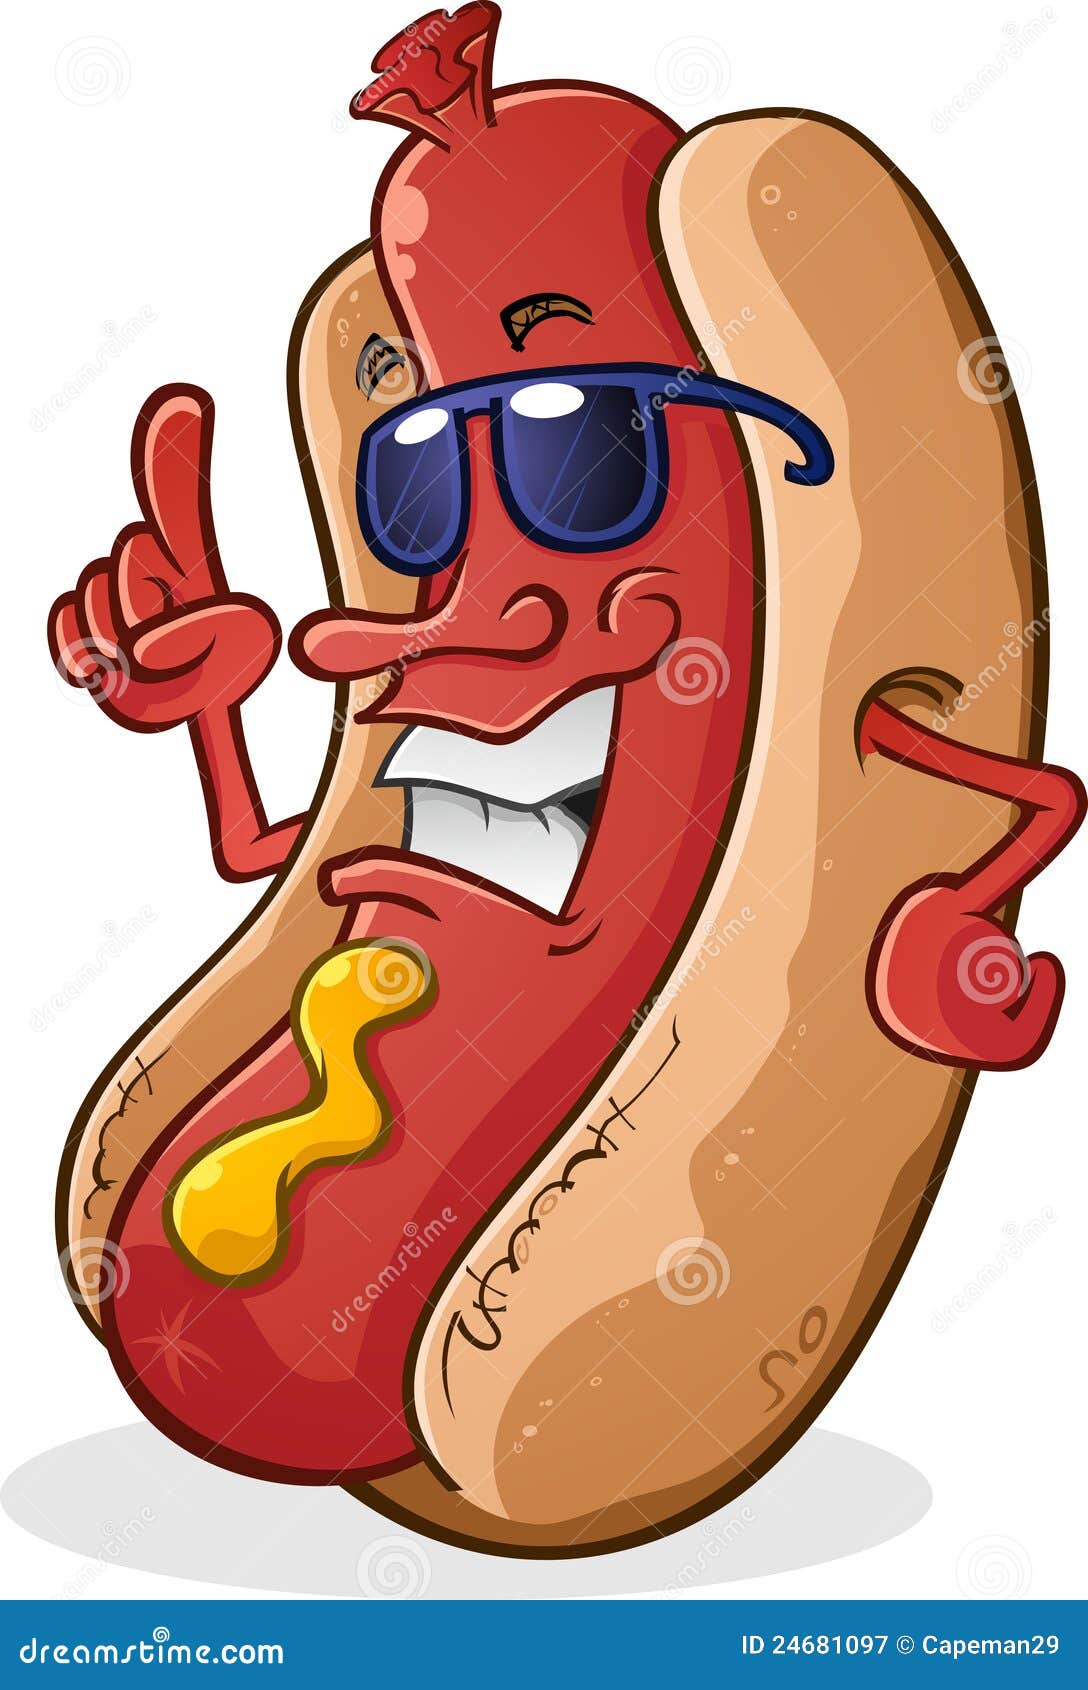 hot dog character with attitude